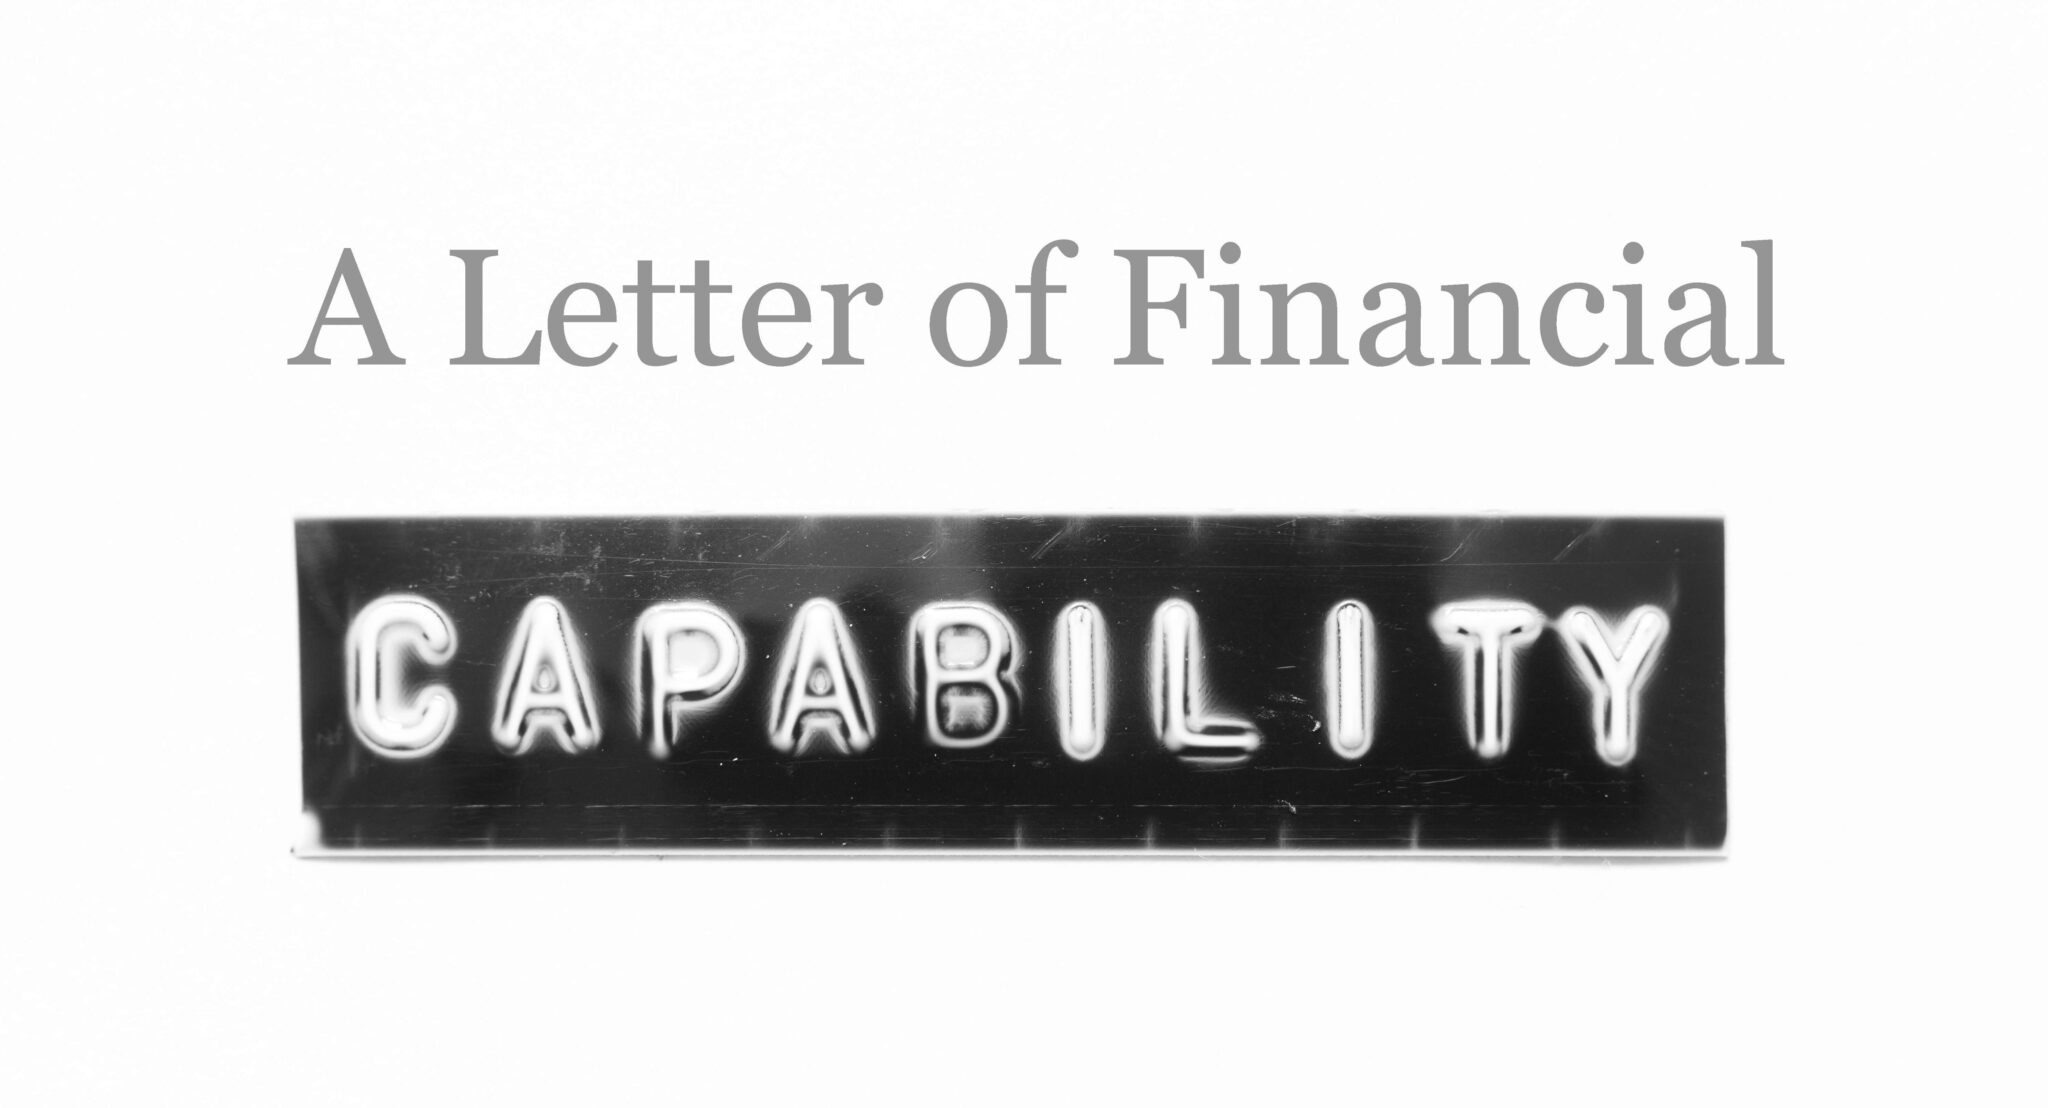 What is a Letter of Comfort or a Letter of Financial Capability?